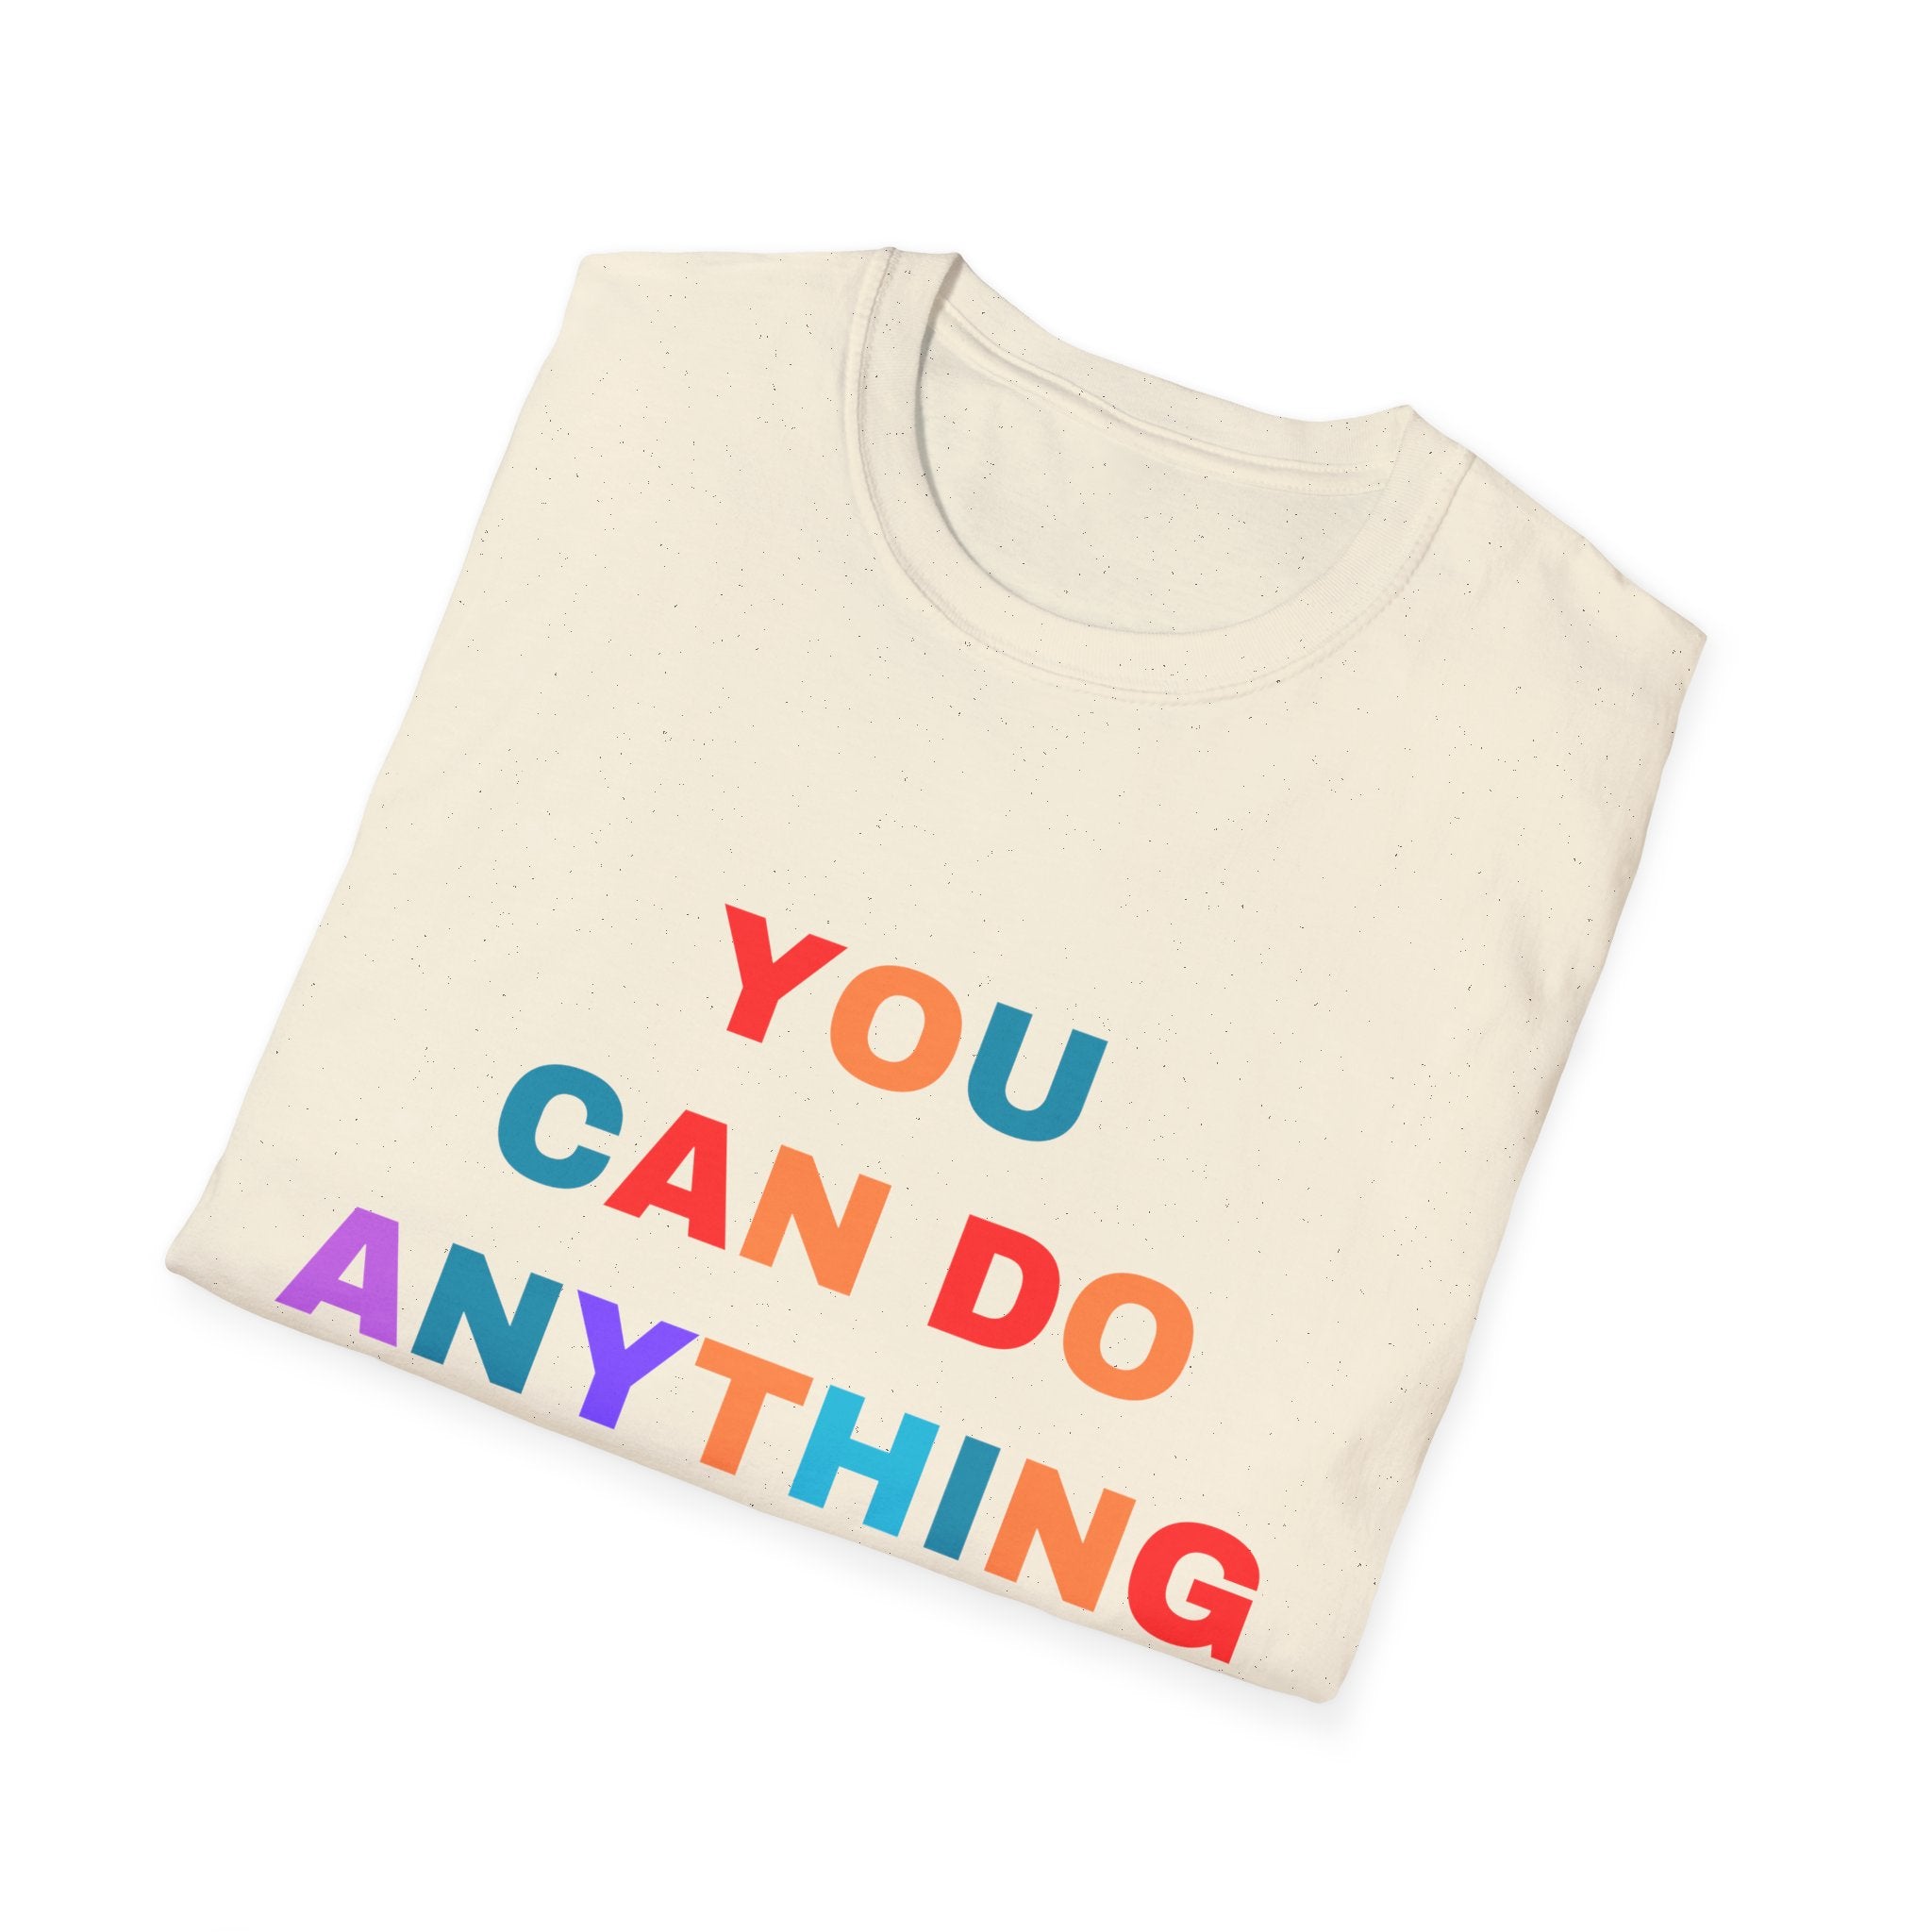 You Can Do Anything Possible Unisex Softstyle T-Shirt for Teachers, Motivational T-shirt, Social Worker T-shirt